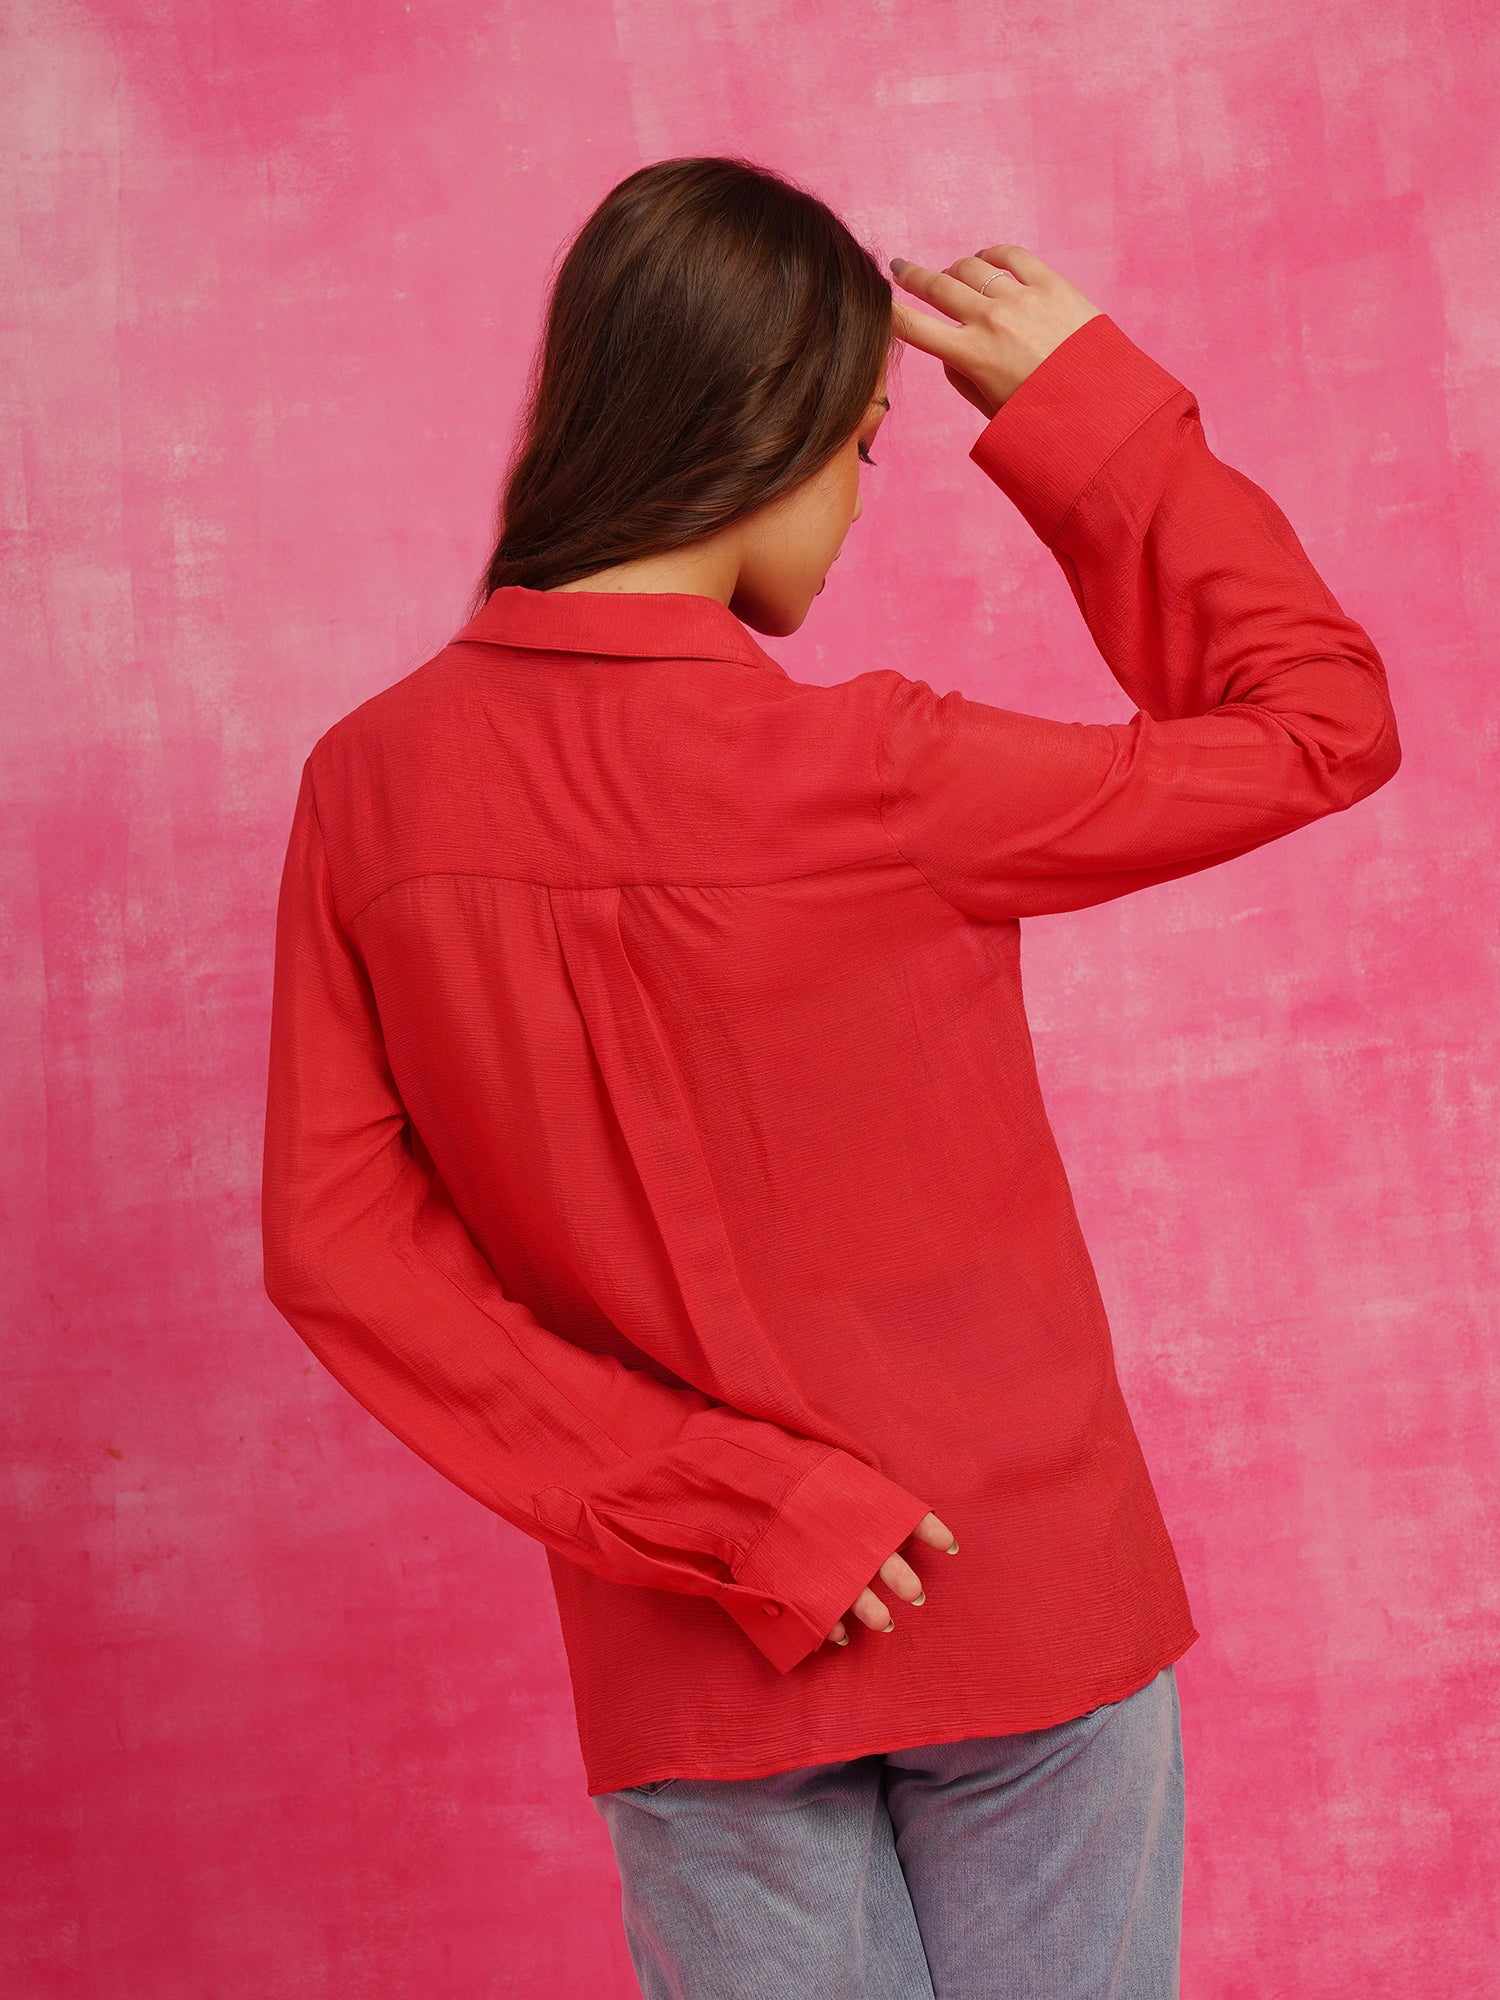 deluxe multi shade embellished red shirt